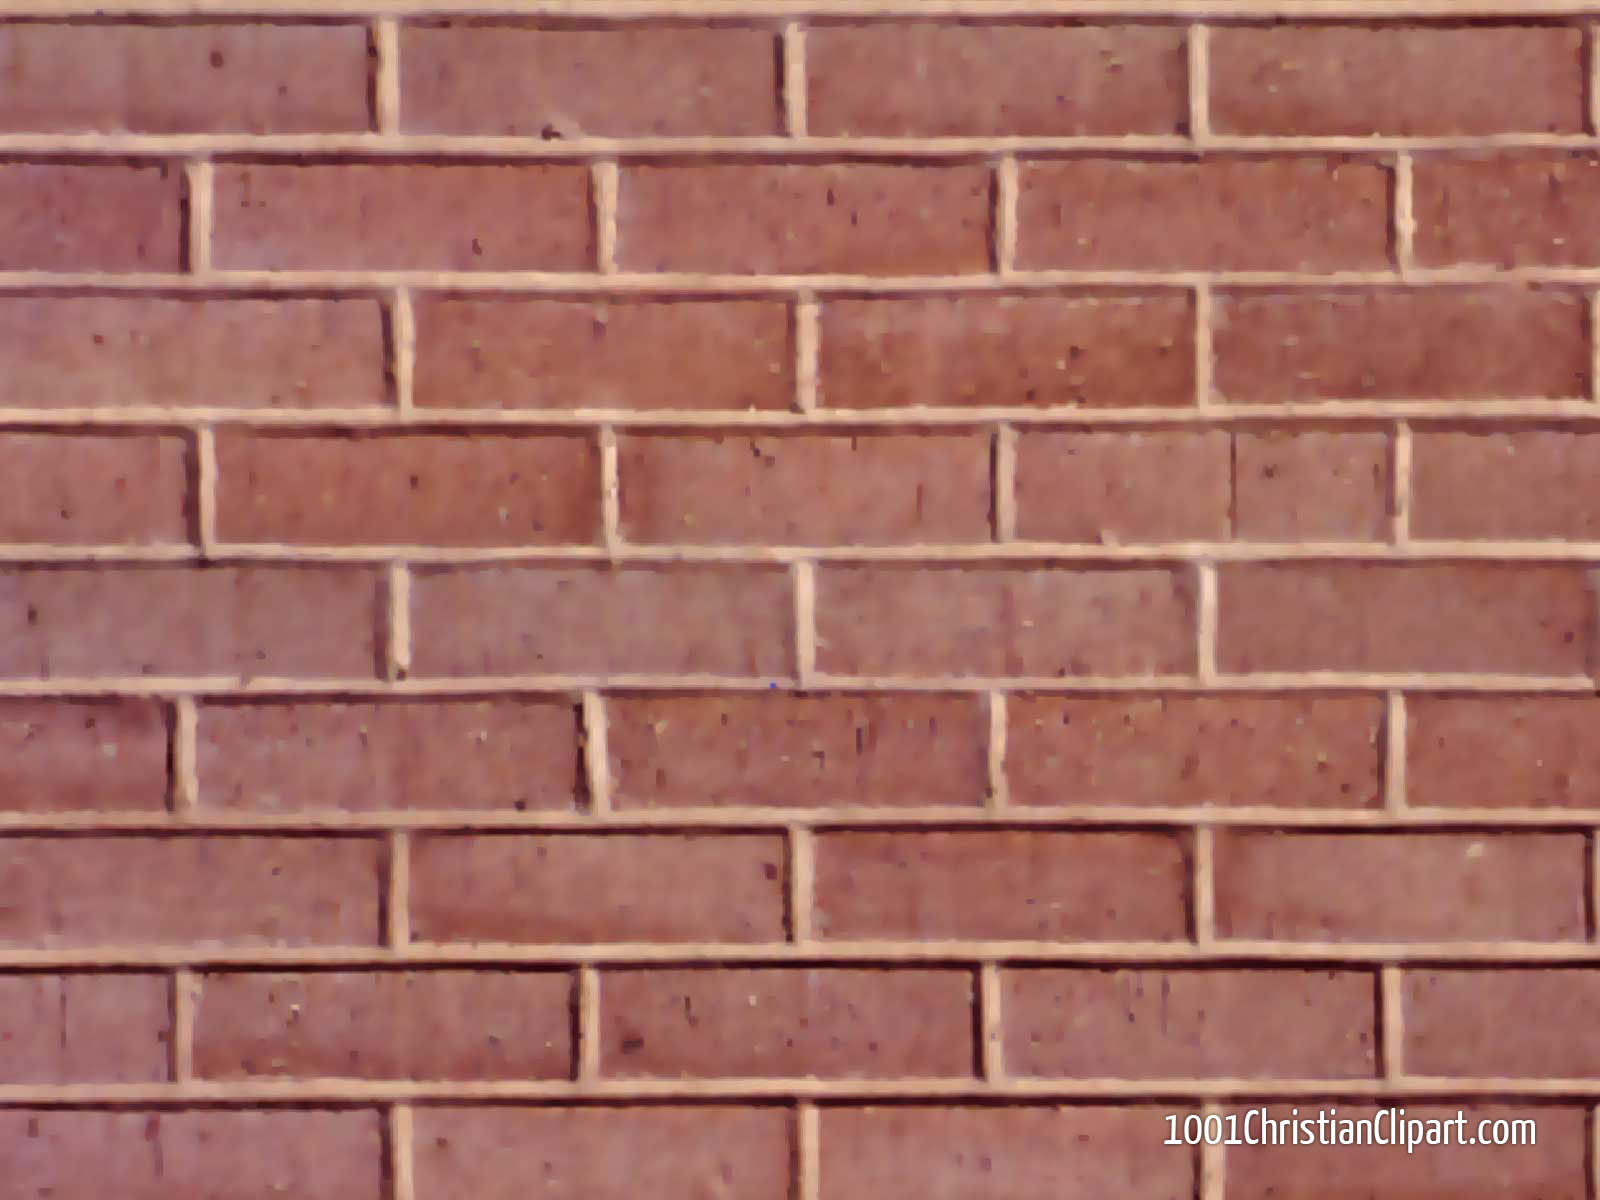 Brick Texture theme for PowerPoint backgrounds, or wallpaper, or Christian 